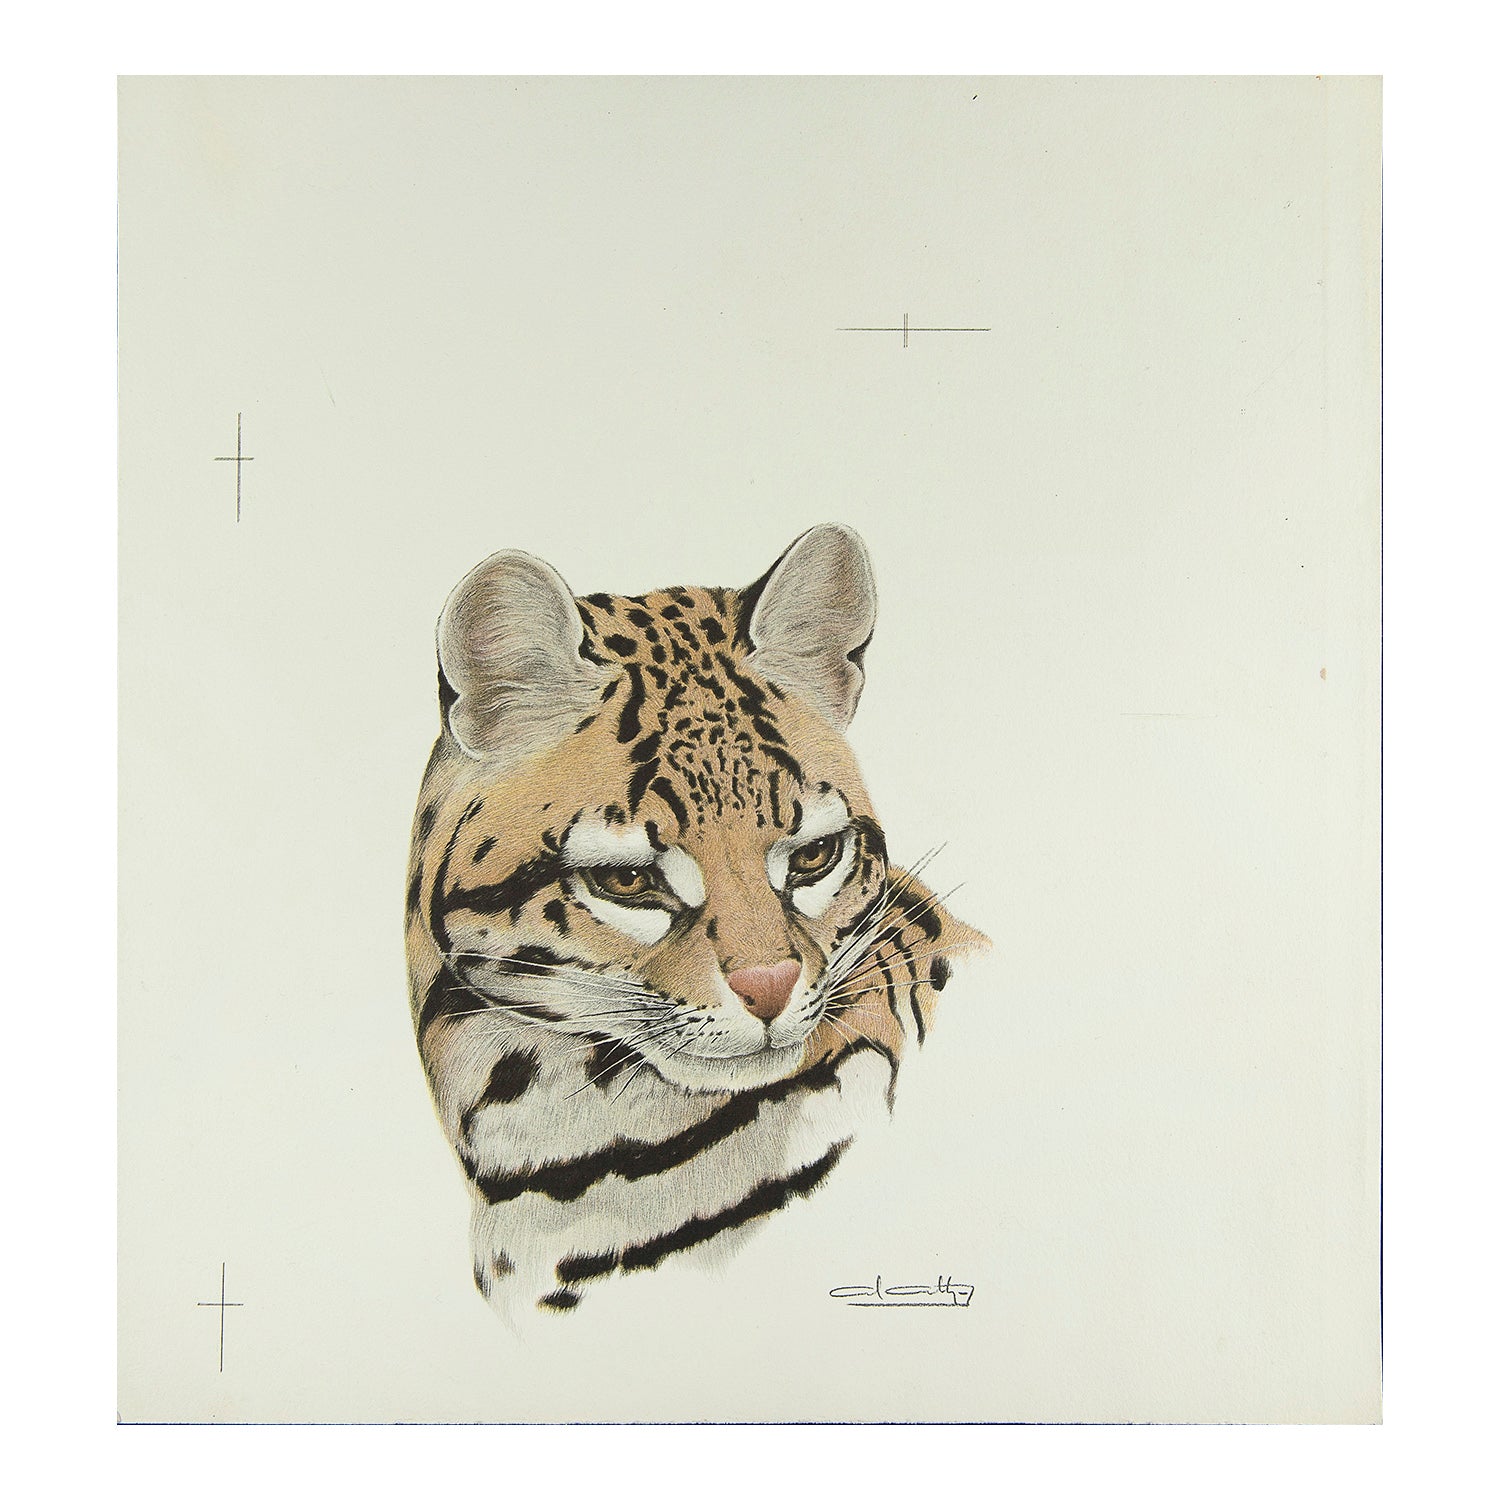  lithographic print, Ocelot Head, by the Argentinian artist Axel Amuchastegui (1921–2002). A very high quality print, produced by the Curwen Press, 1966.